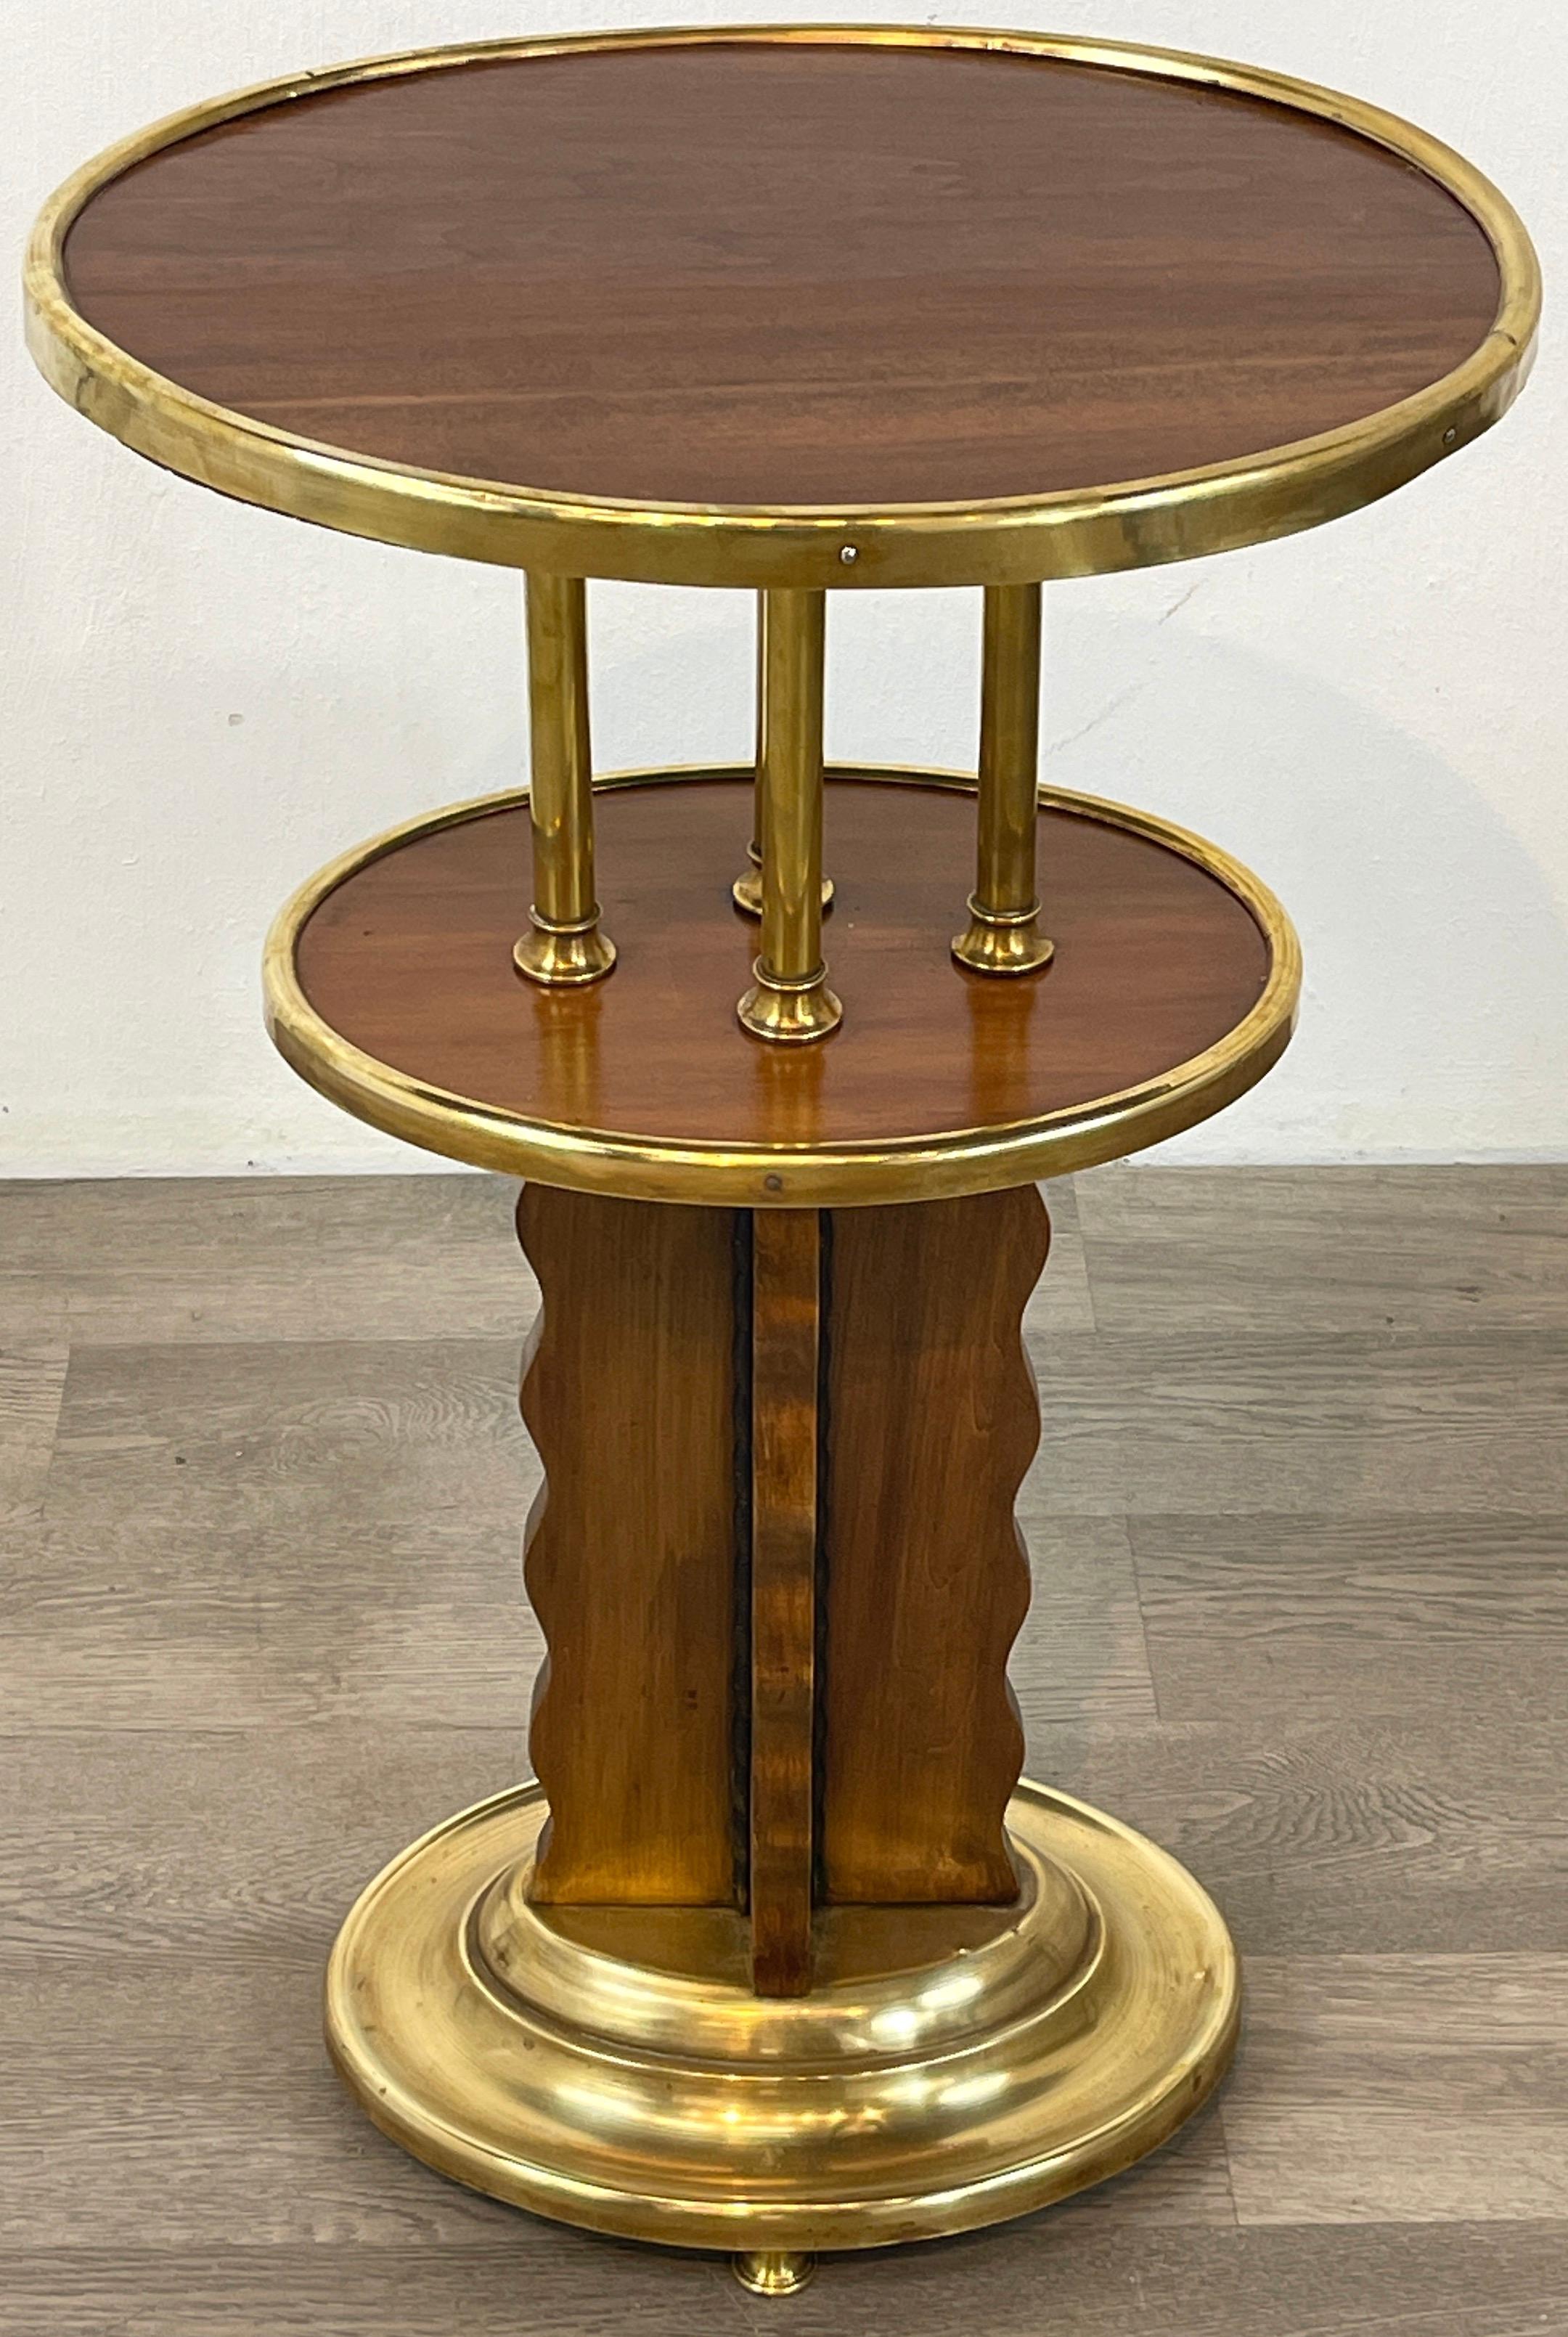 Austrian Viennese Secession Brass Mounted Hardwood Side Table, Austria C. 1920 For Sale